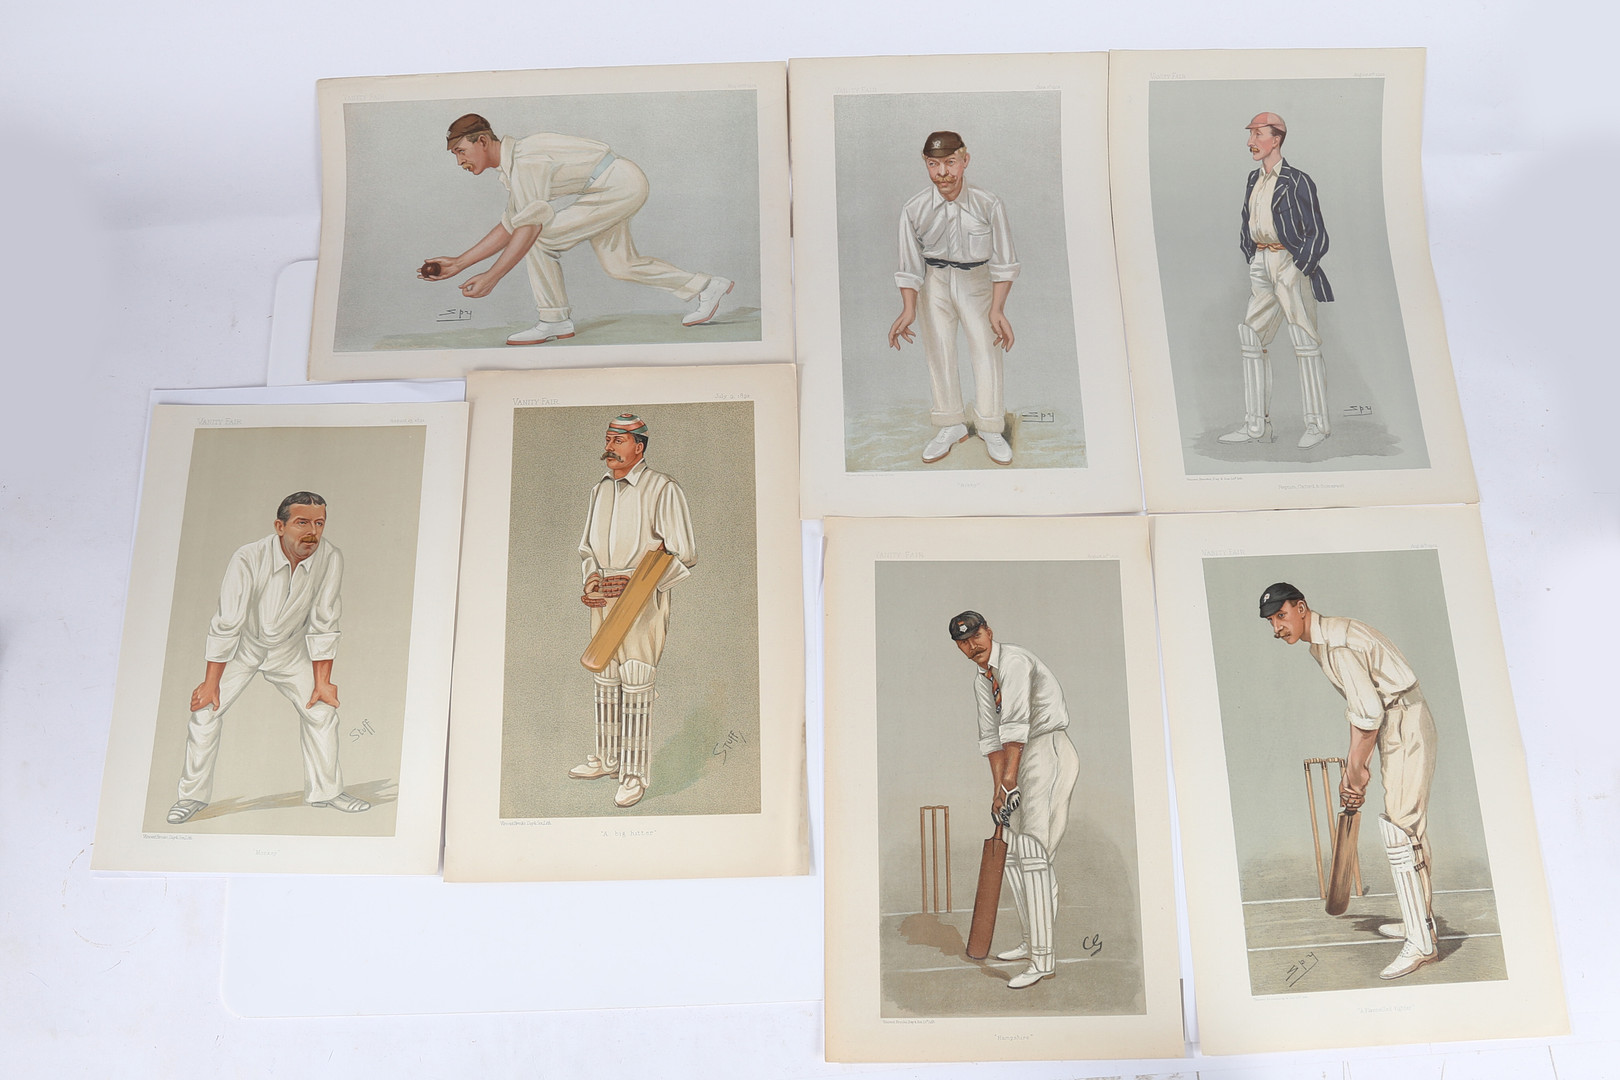 VANITY FAIR. A COLLECTION OF 18 CARICATURES, MOSTLY LATE 19TH-CENTURY, COLOUR LITHOGRAPHIC. - Image 4 of 5